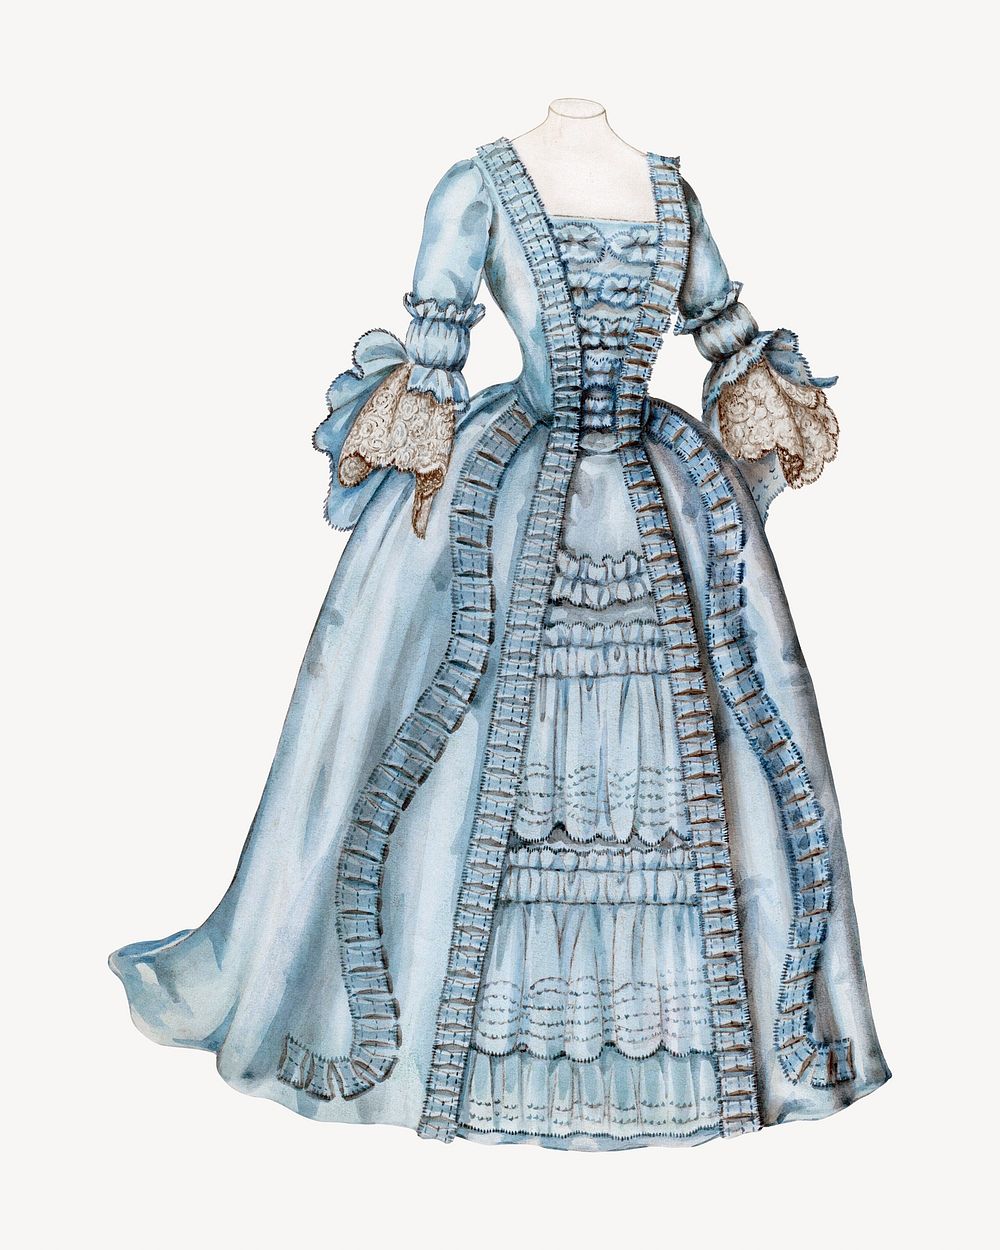 Blue Victorian gown illustration 